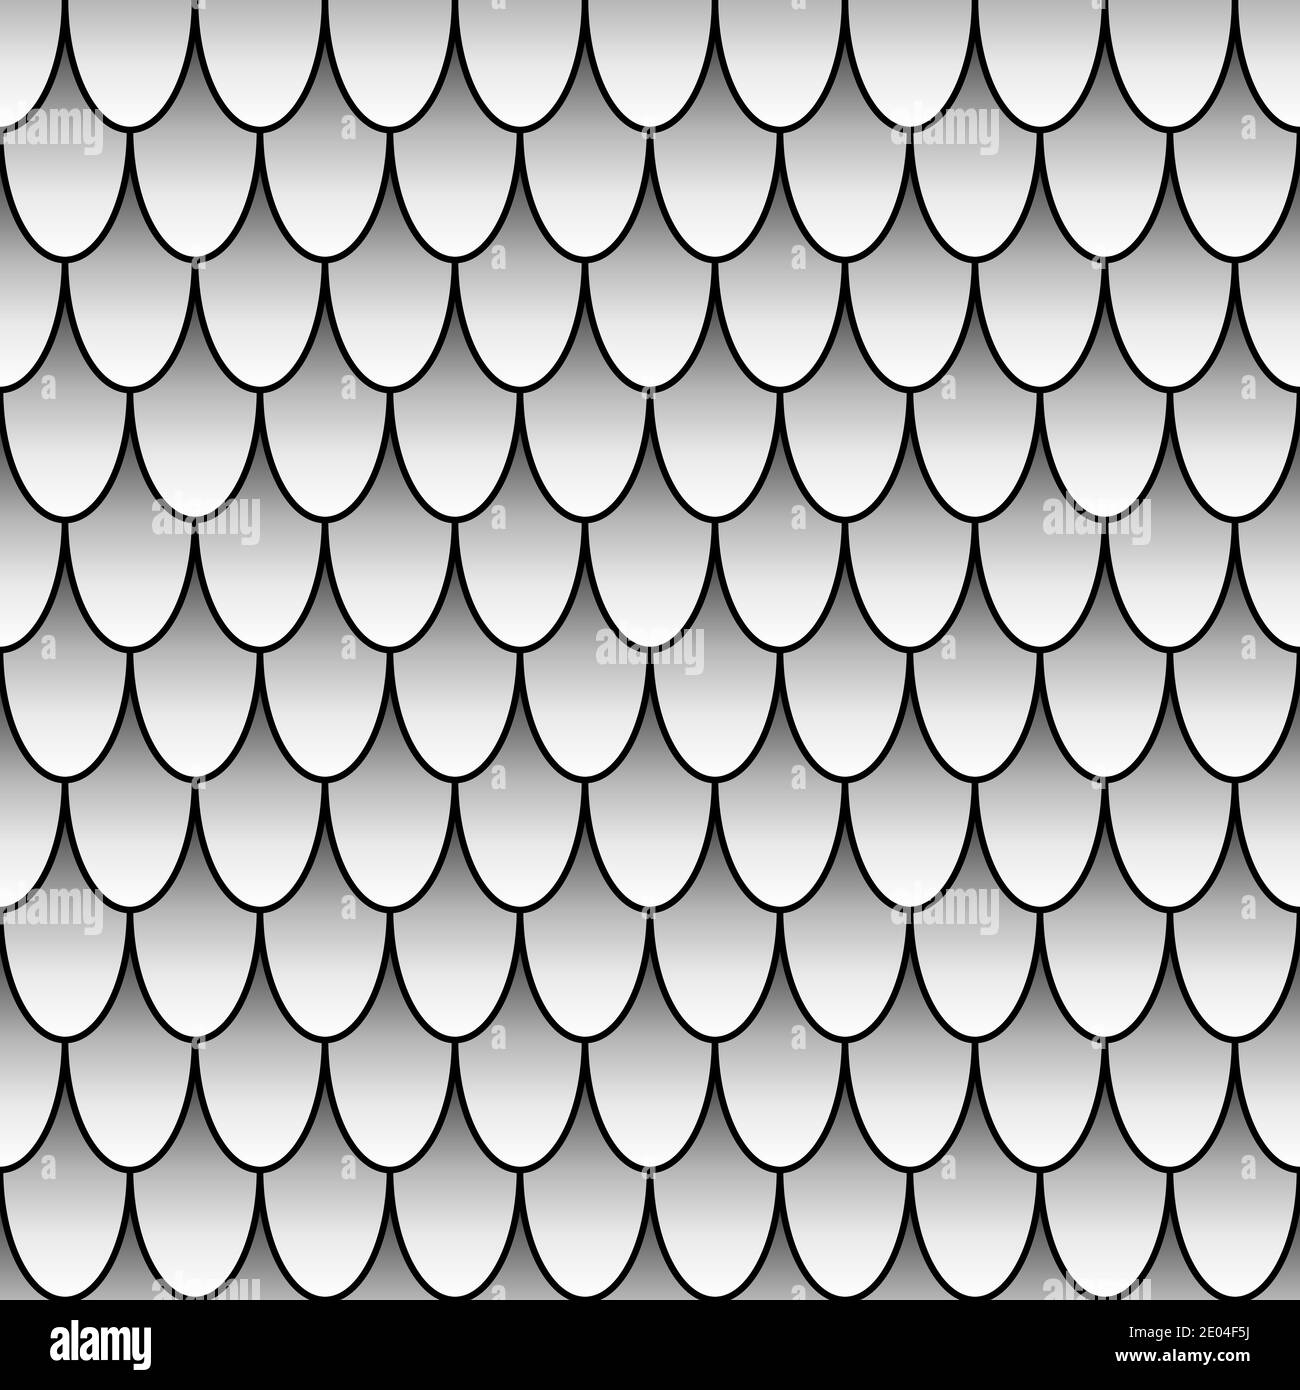 Fish scale pattern vector Black and White Stock Photos & Images - Alamy